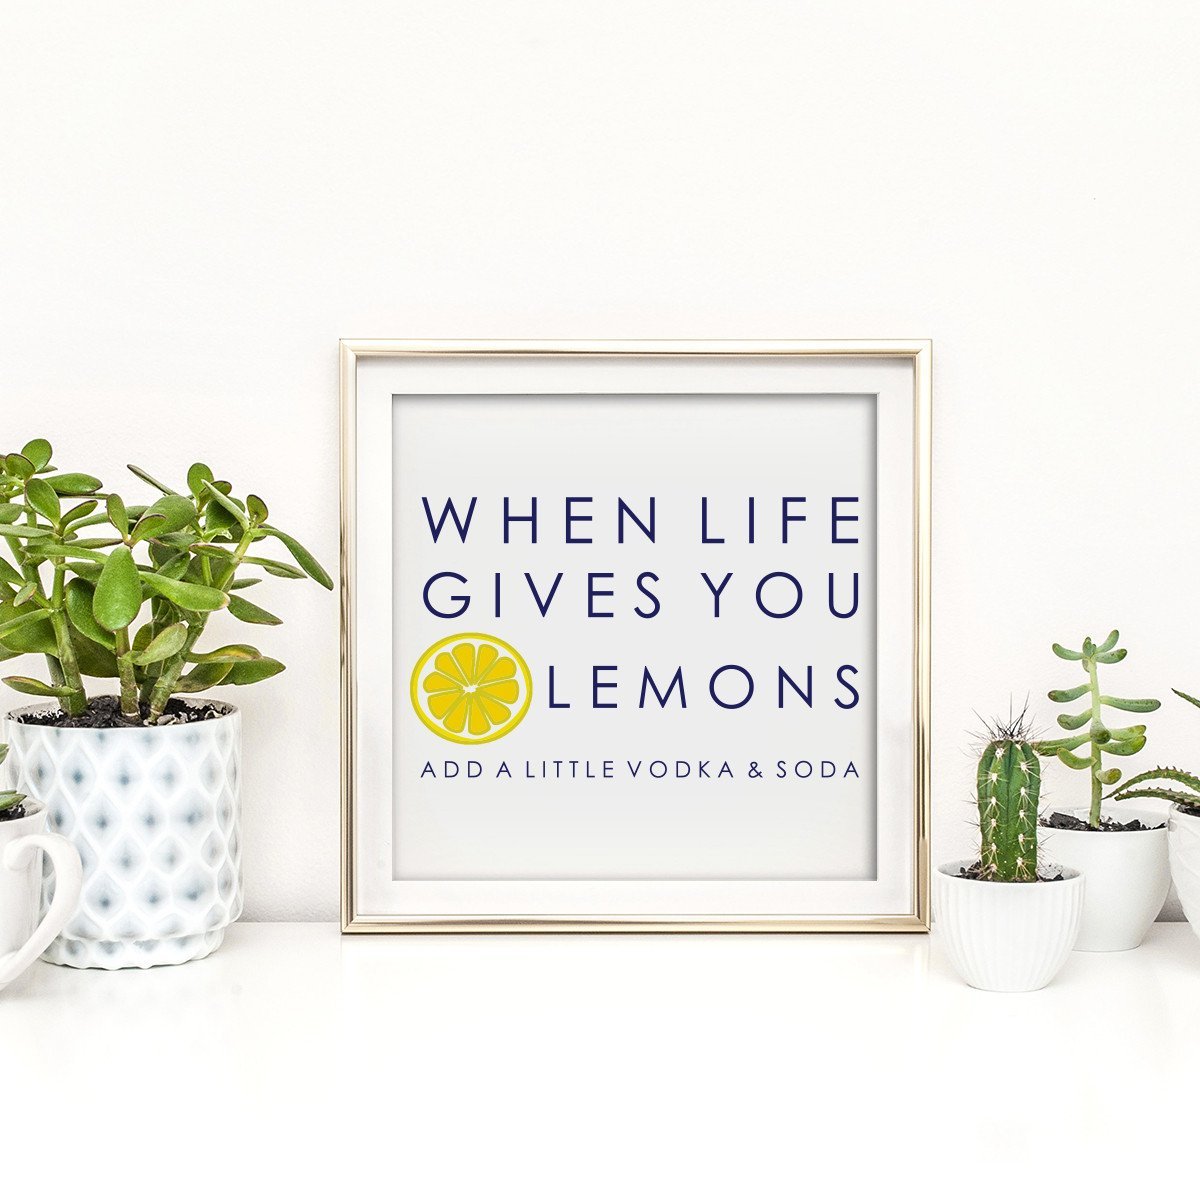 When Life Gives You Lemons Print Gallery Print 12x12 / Unframed Katie Kime